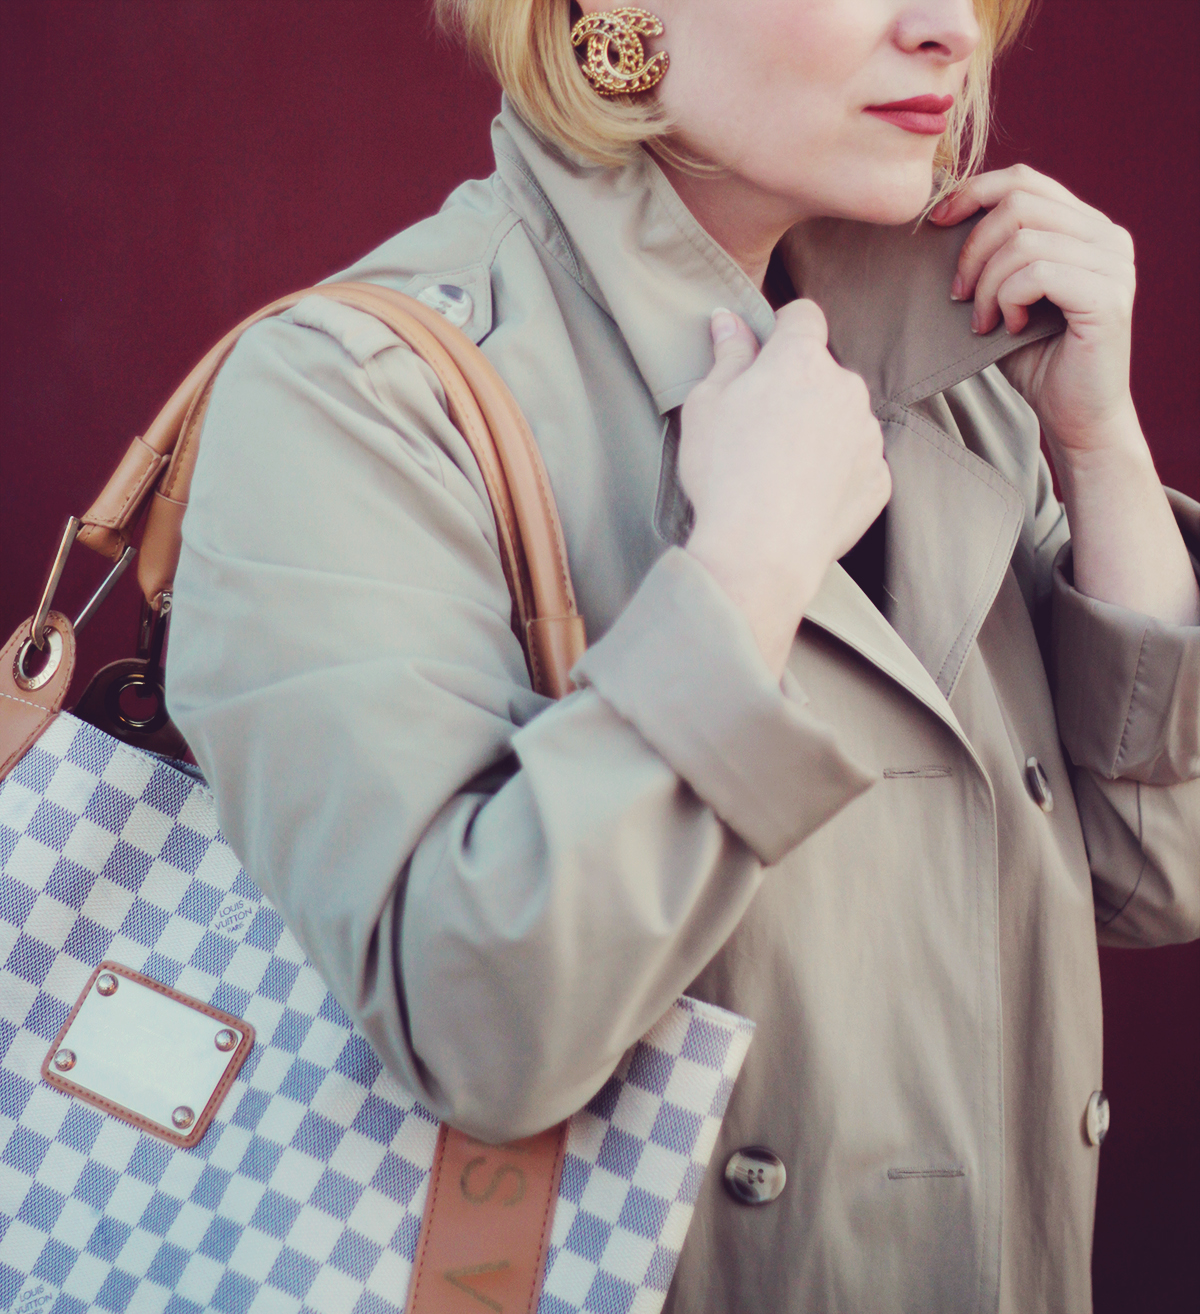 louis vuitton bag, long trench coat, spring look, spring, matte lips, vintage chanel dupe earrings